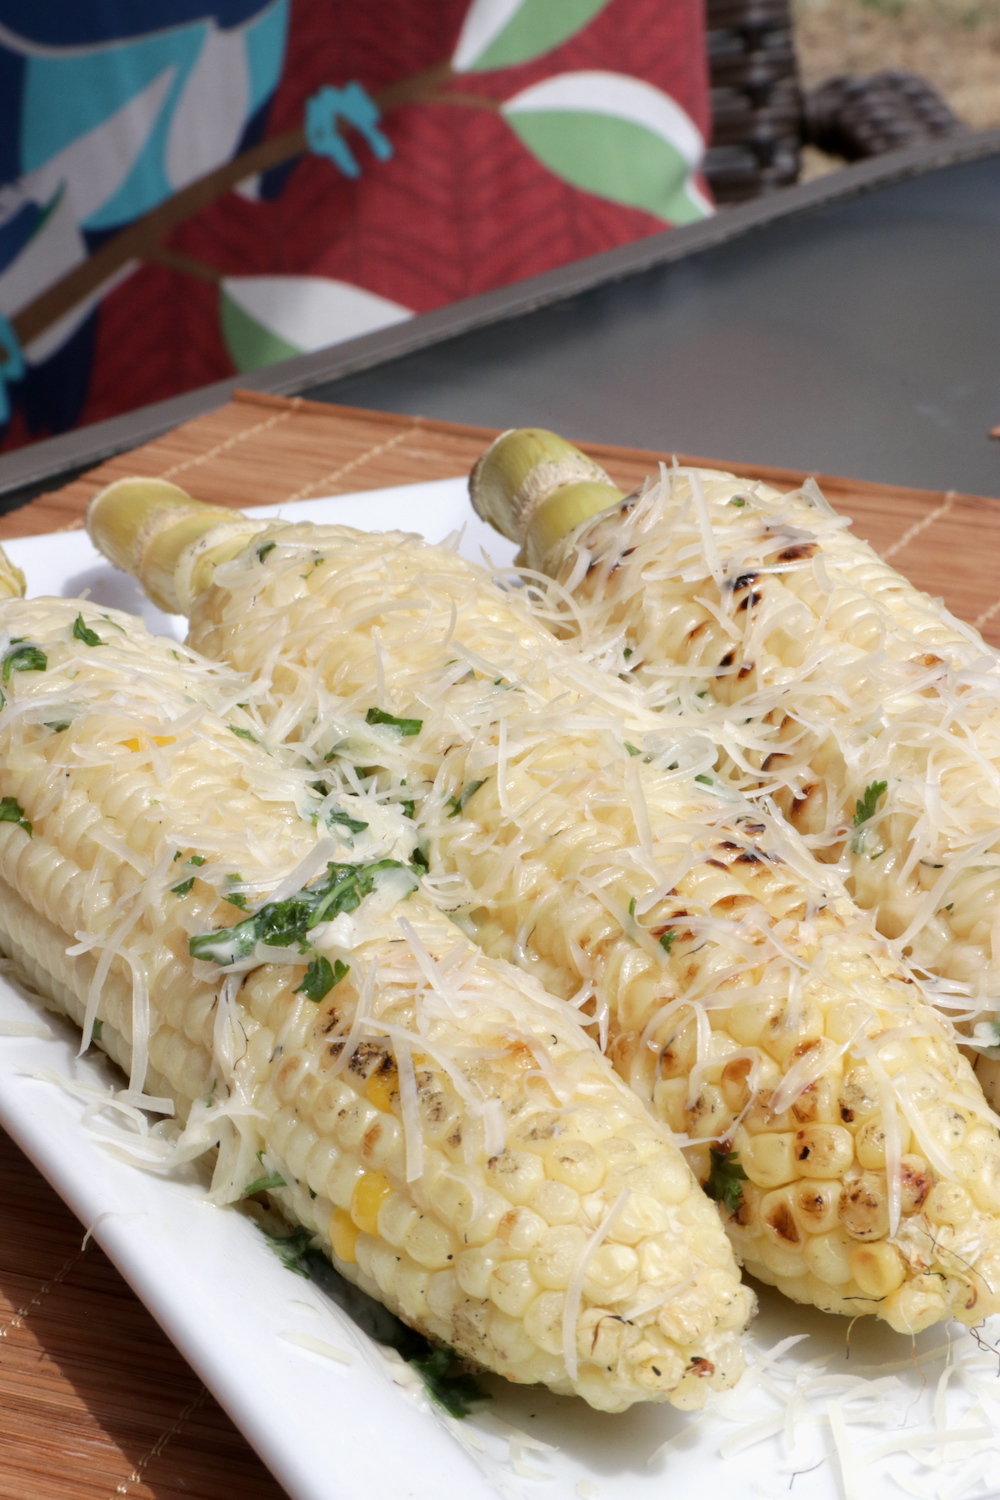 Grilled Corn on the Cob with Cilantro Lime Butter